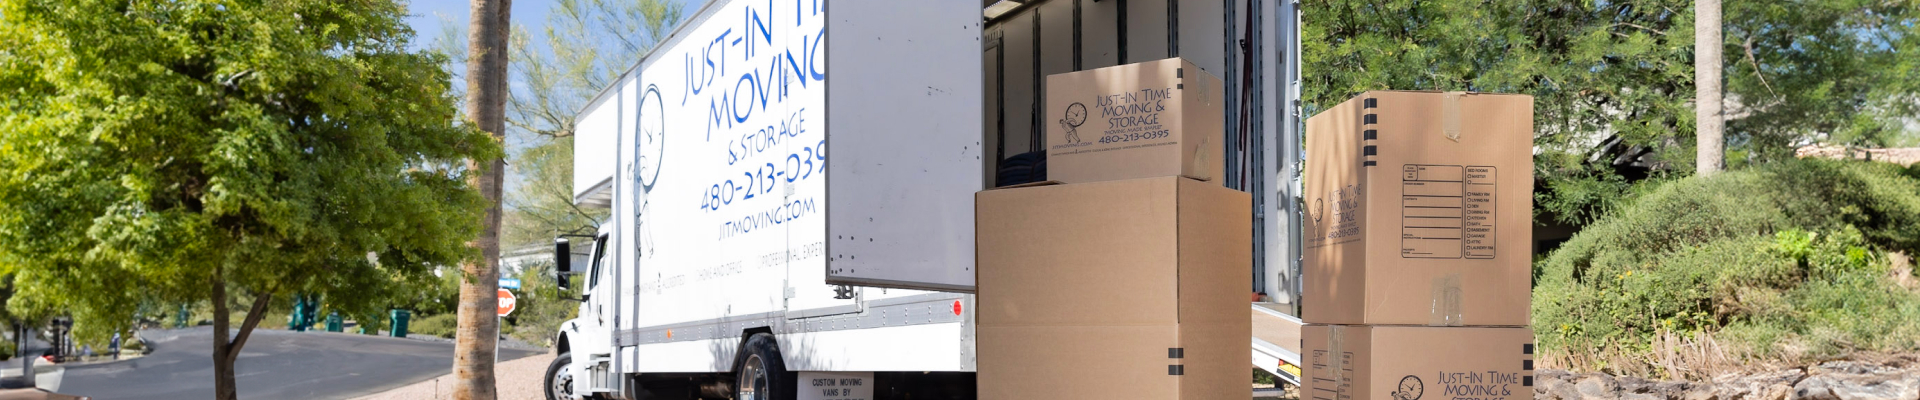 Packing Services in Phoenix AZ - Just-in Time Moving and Storage